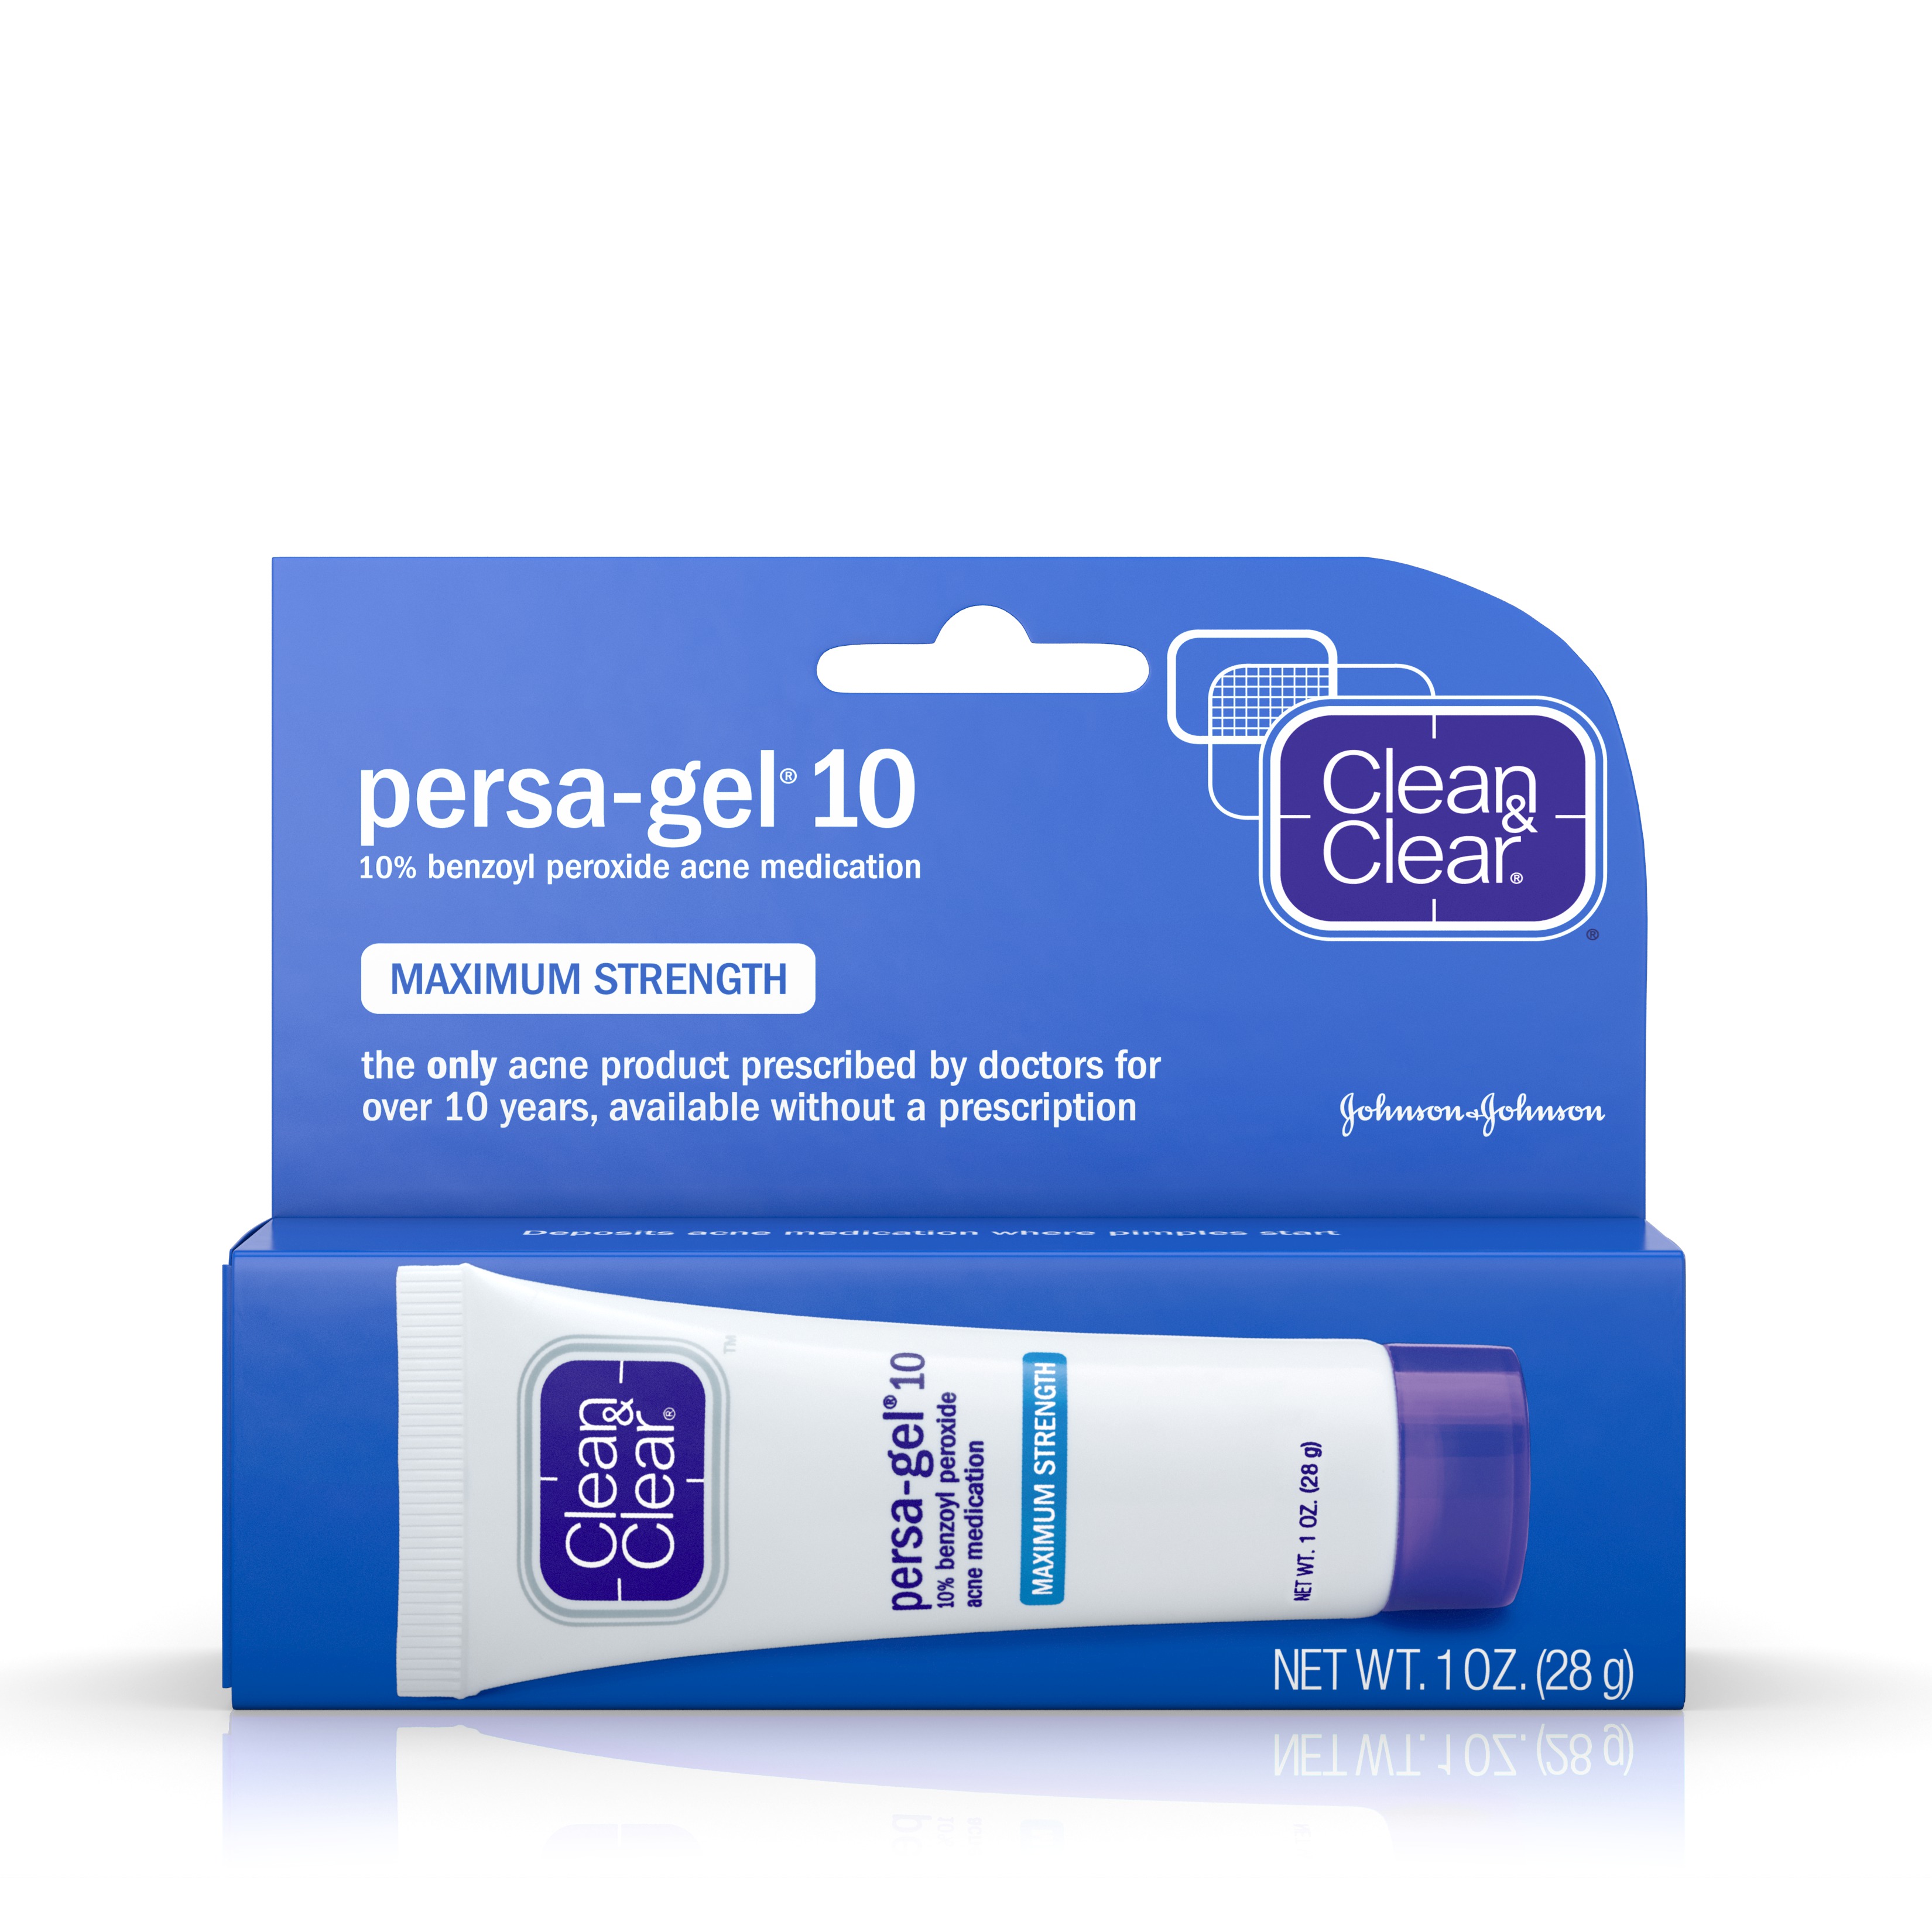 Clean & Clear Persa-Gel 10 Acne Medication with Benzoyl Peroxide, 1 oz -  Traveller Location